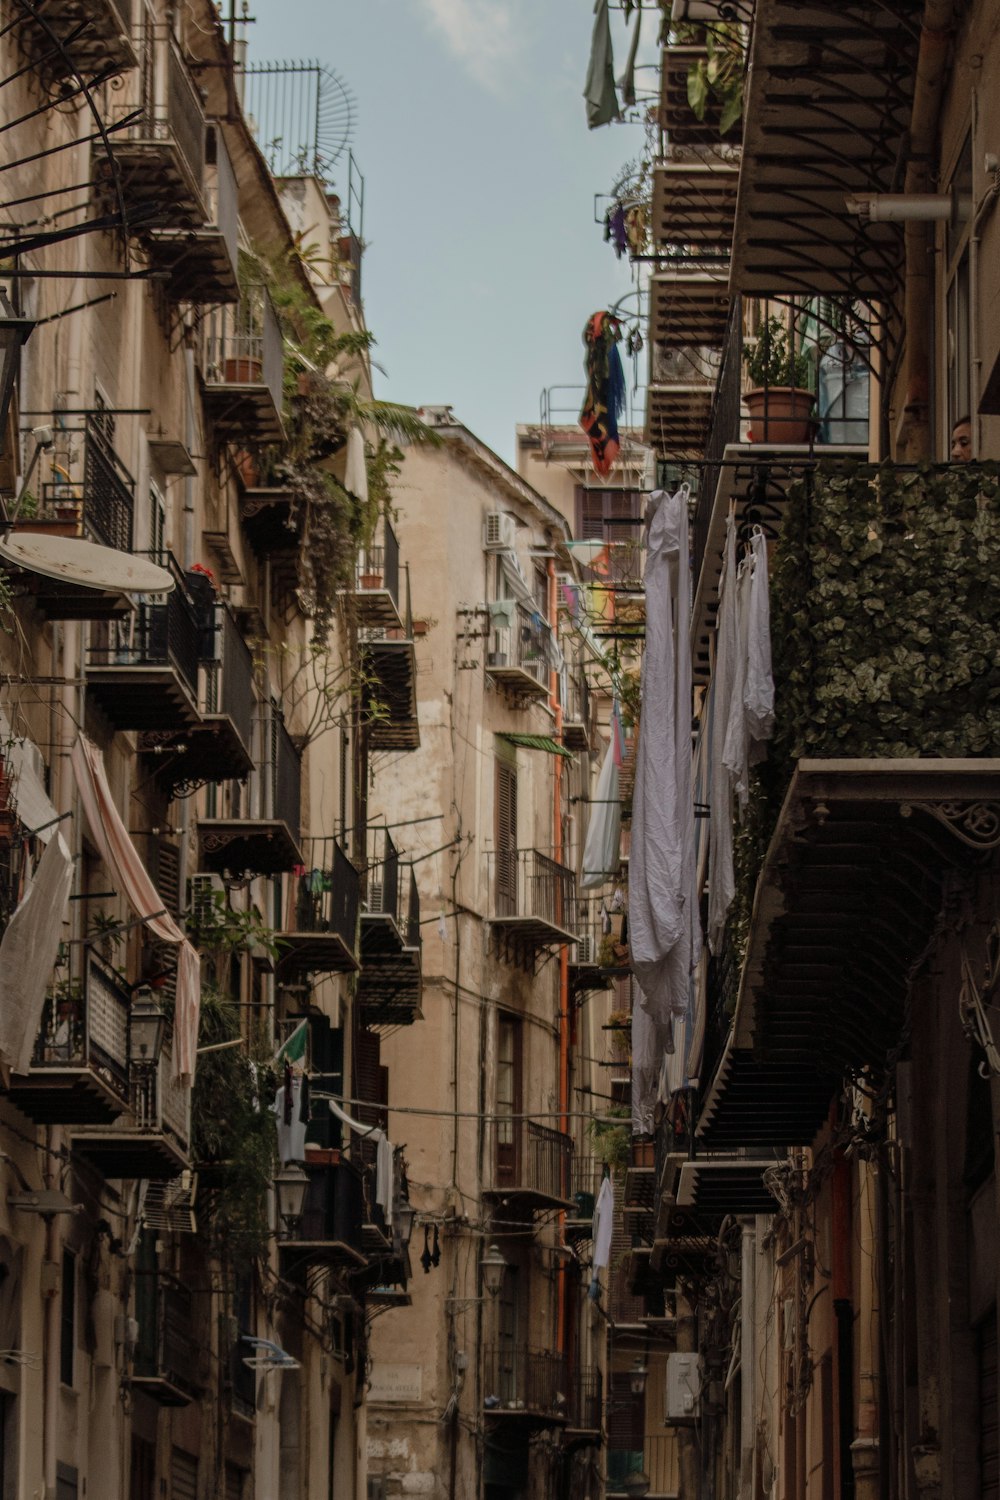 a narrow alleyway with clothes hanging out to dry